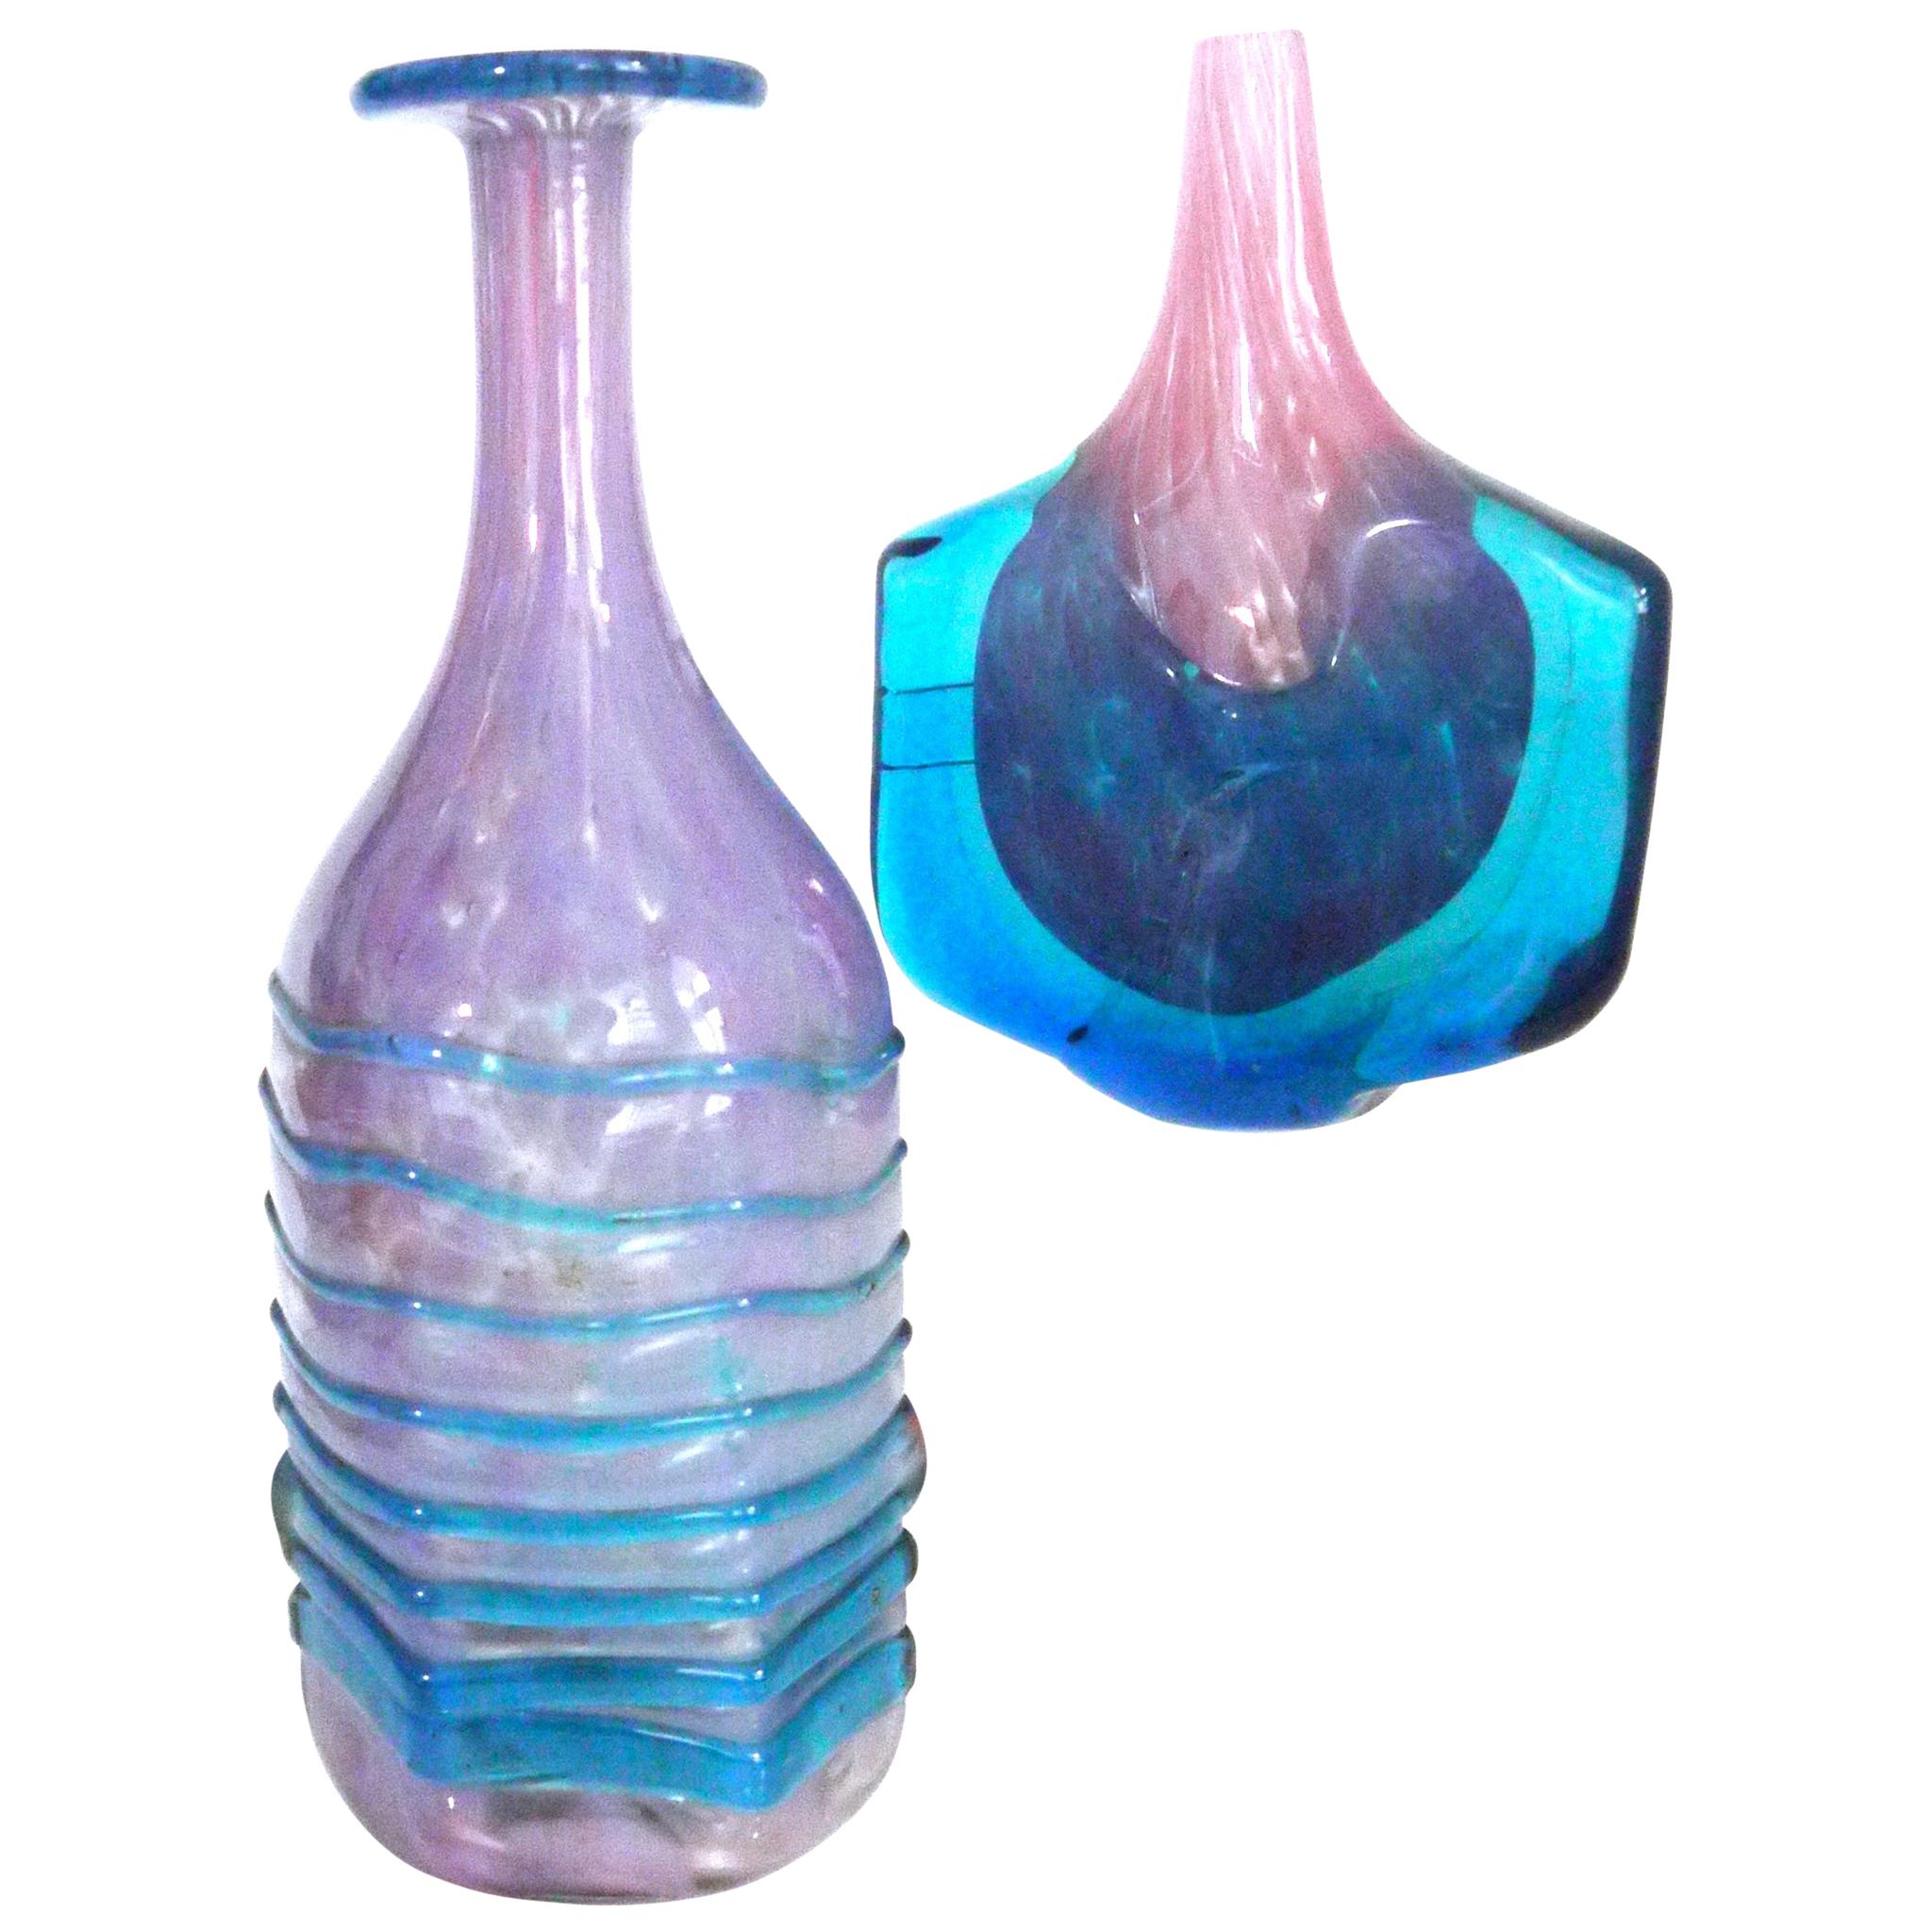 Mdina 'Axe' Head and Bottle with Trail Applied Lines in Pink and Blue 1980 Malta For Sale